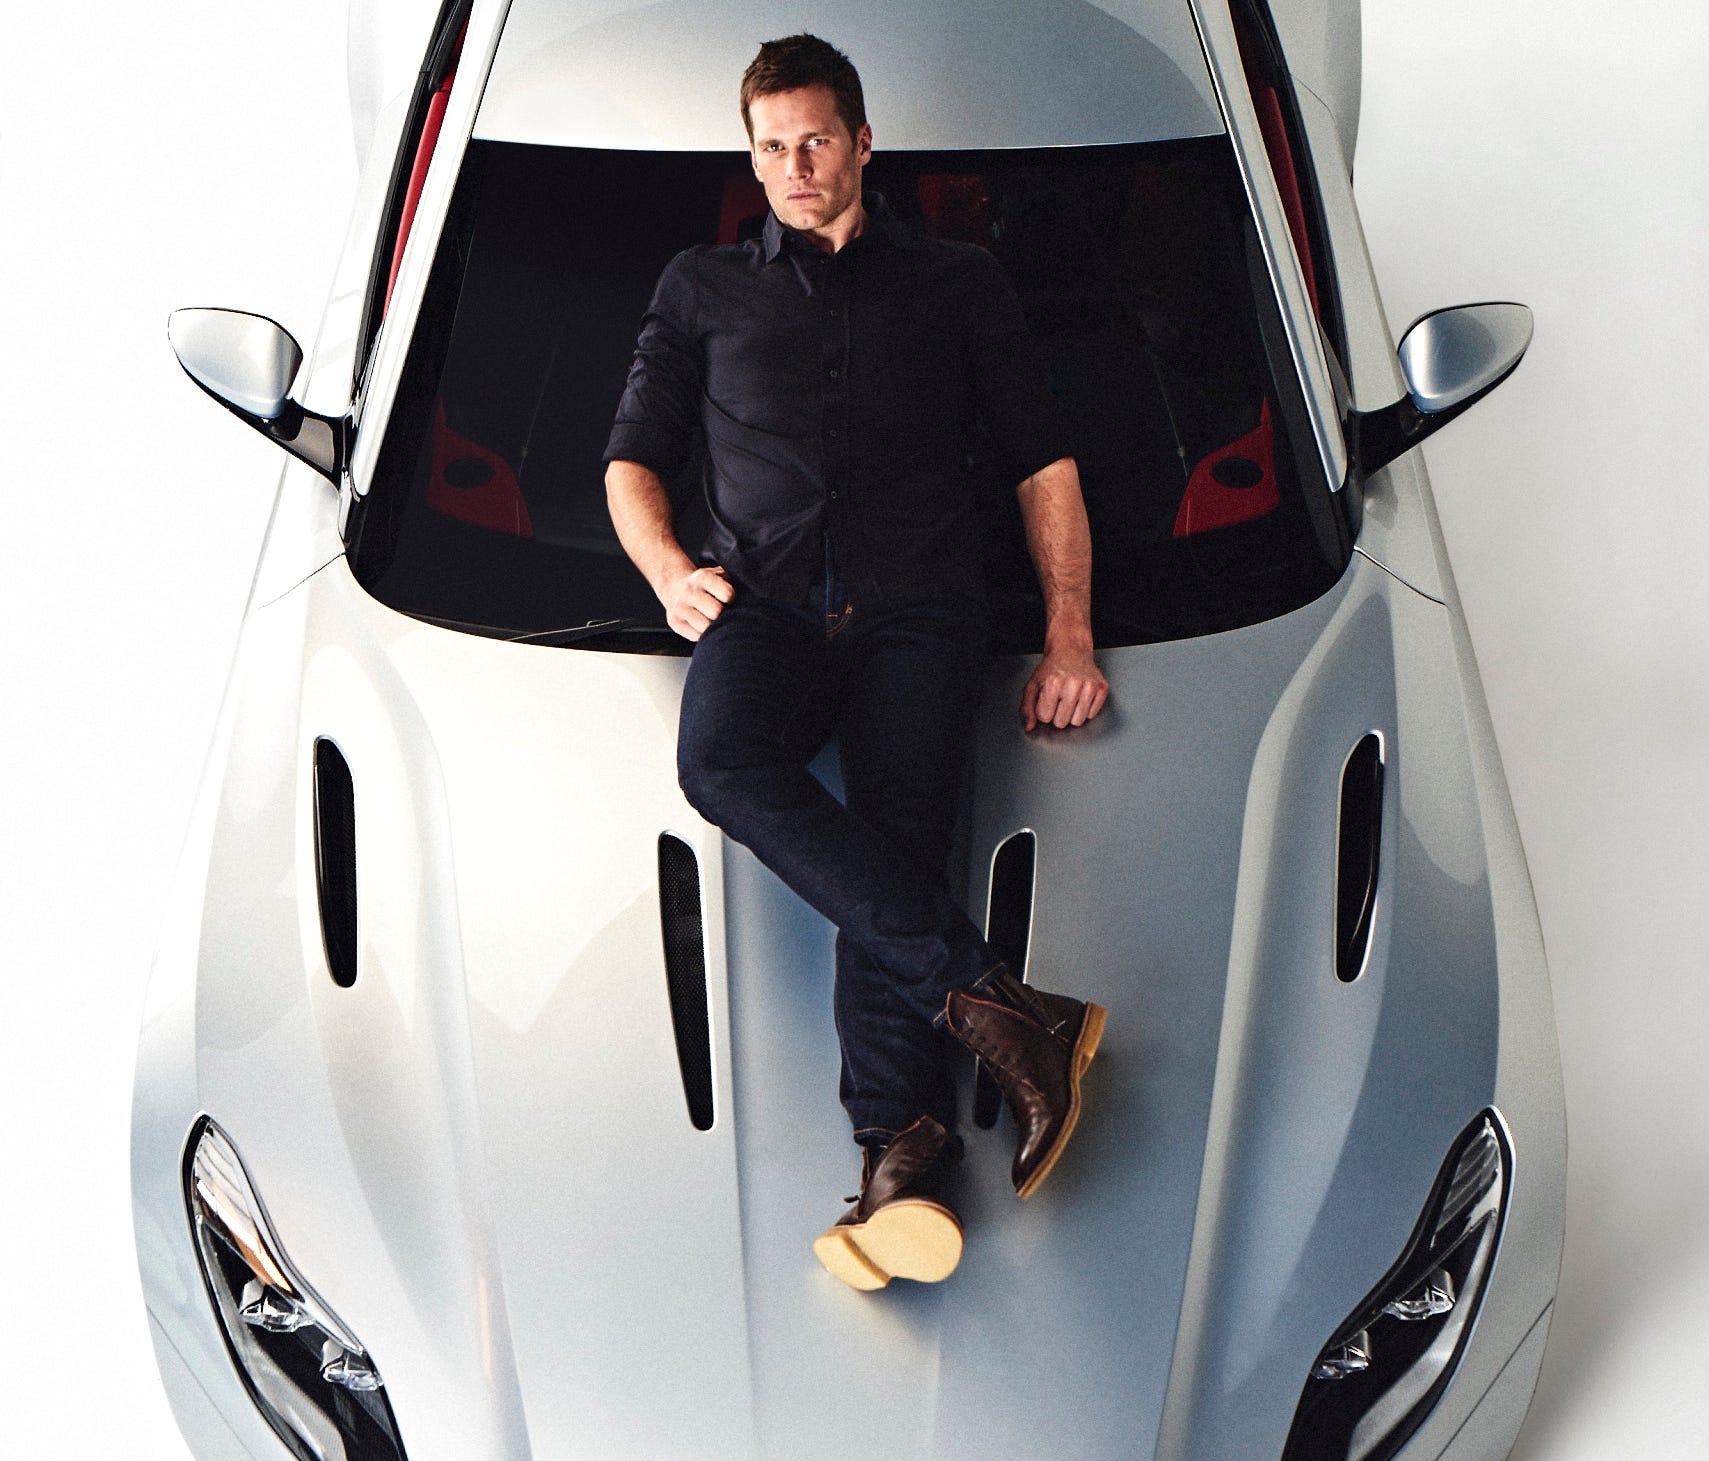 Tom Brady picked up an endorsement with Aston Martin.